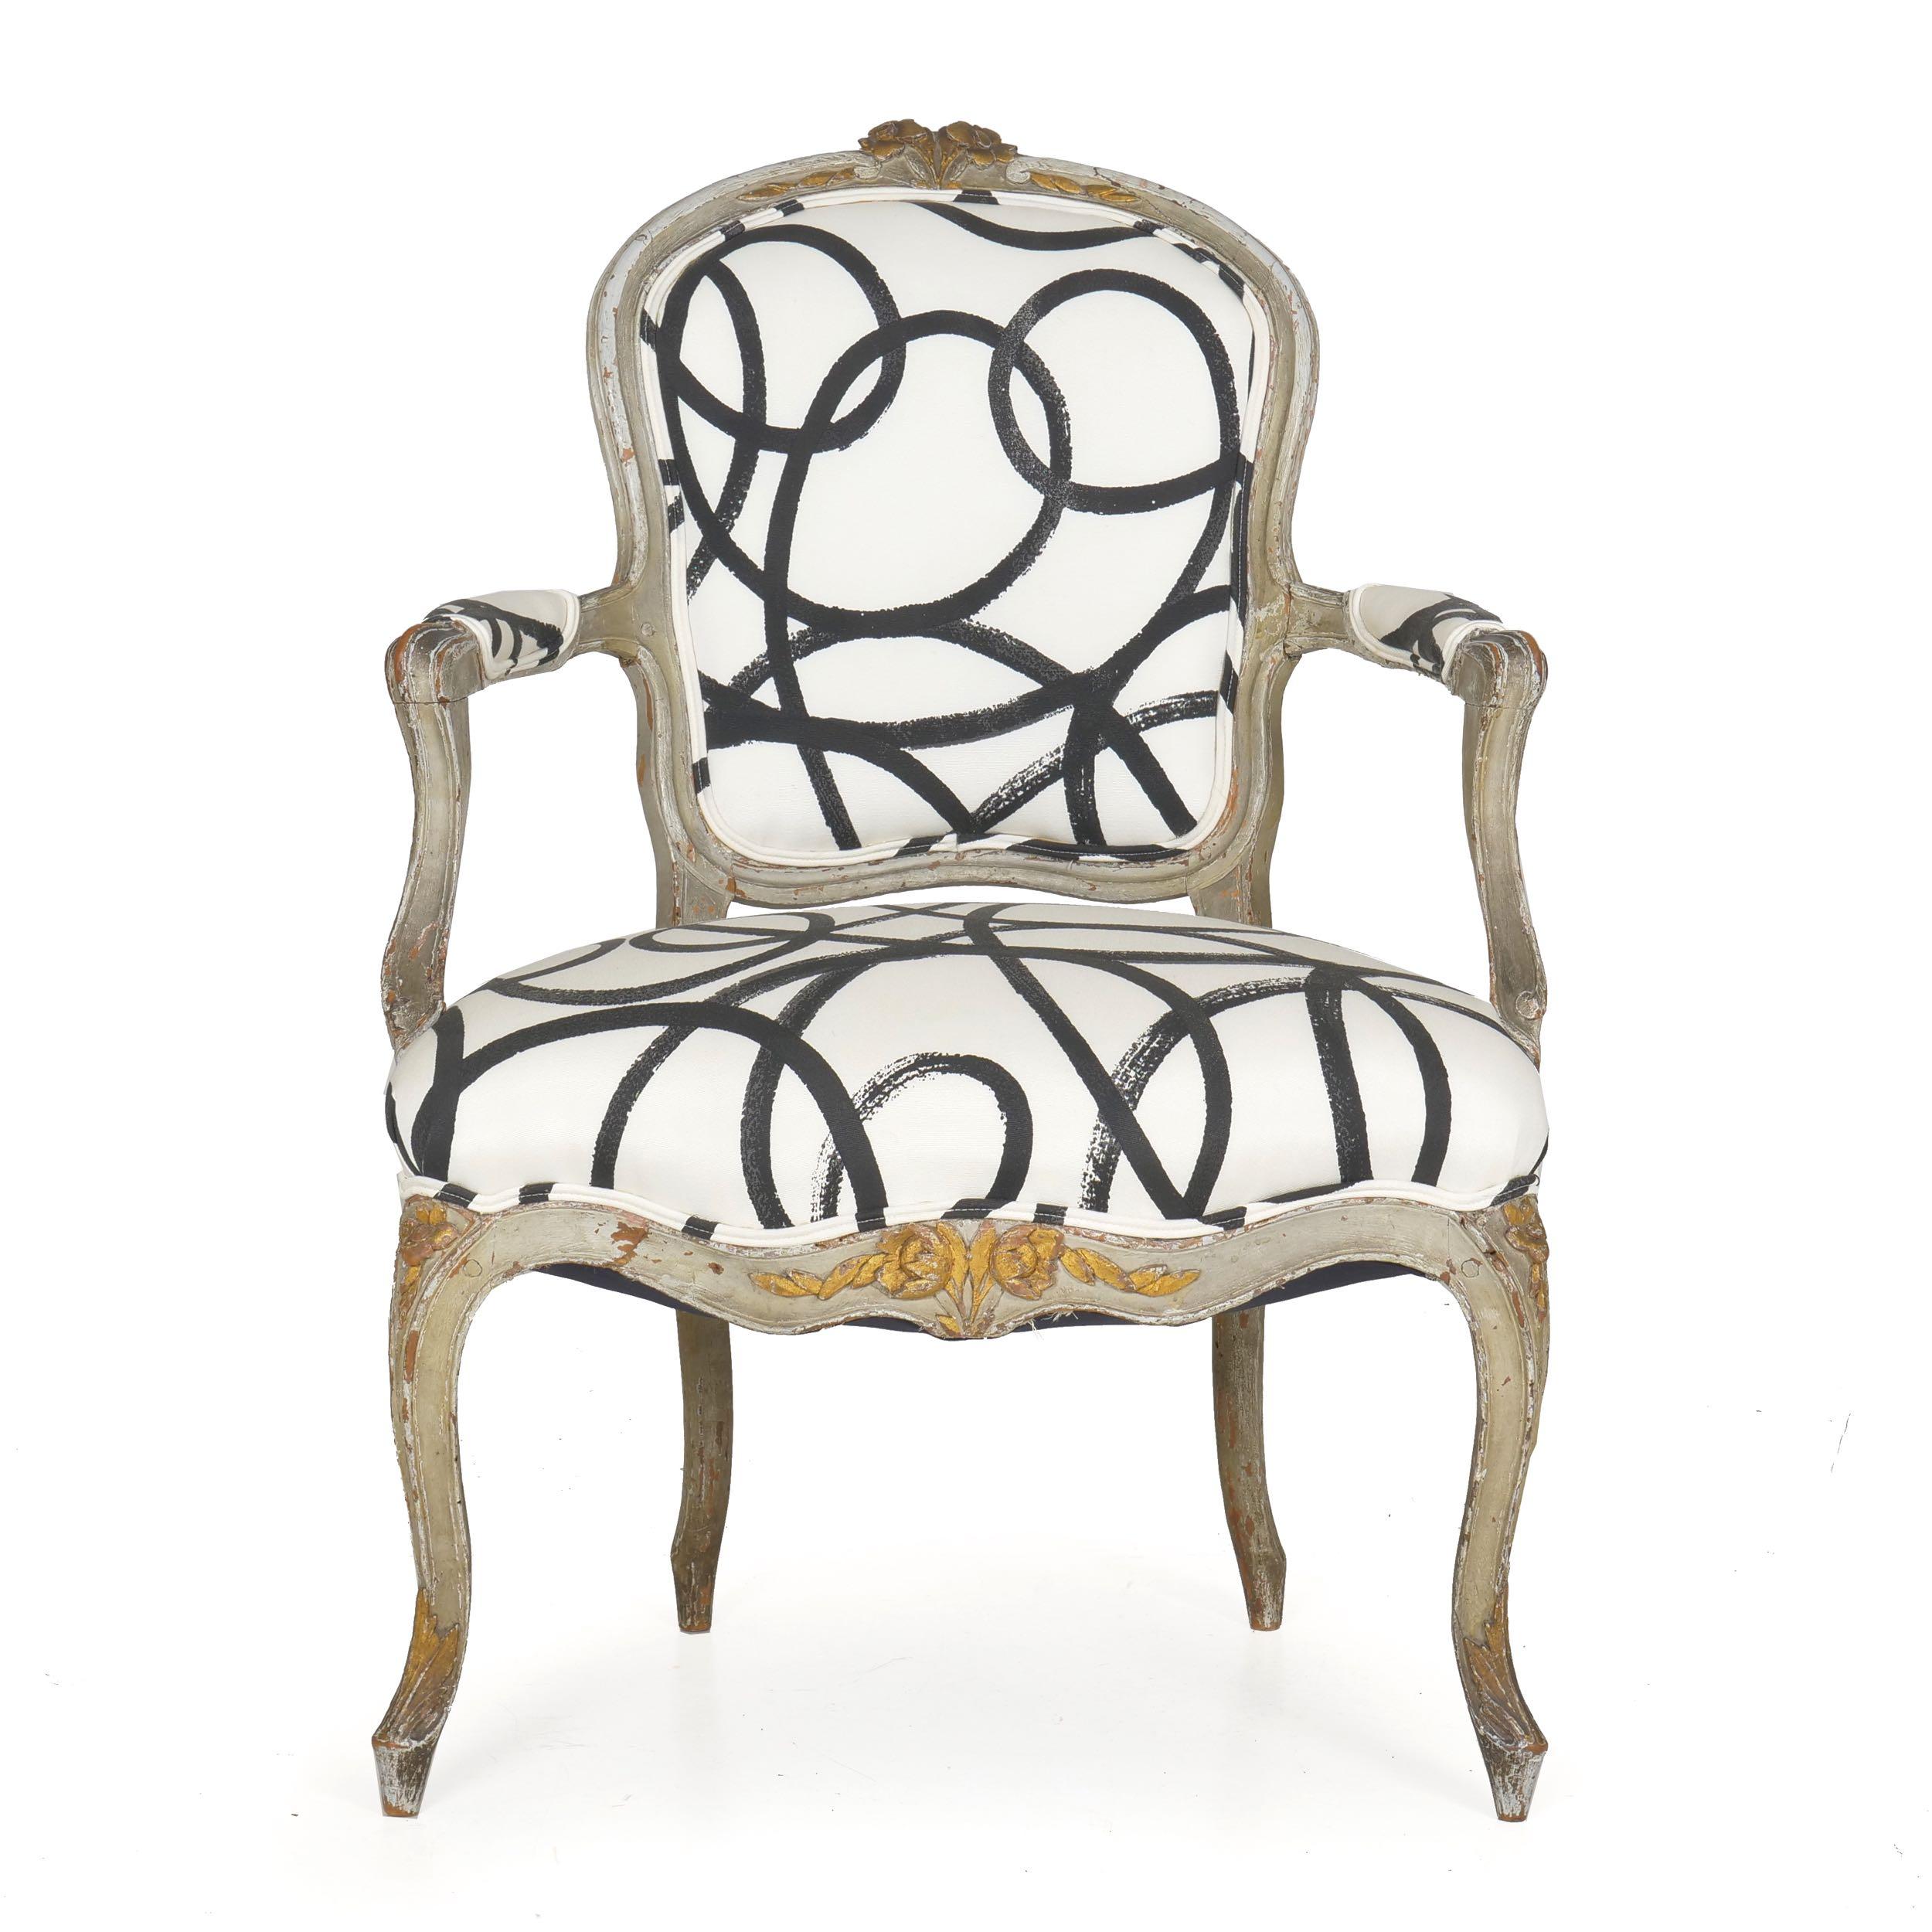 French Louis XV period worn gray painted fauteuil
circa late 18th-early 19th century; with parcel gold highlights
Item # 008EXP26I-3

A gorgeous painted fauteuil of the Louis XV period, this delightful chair has a historical surface of many